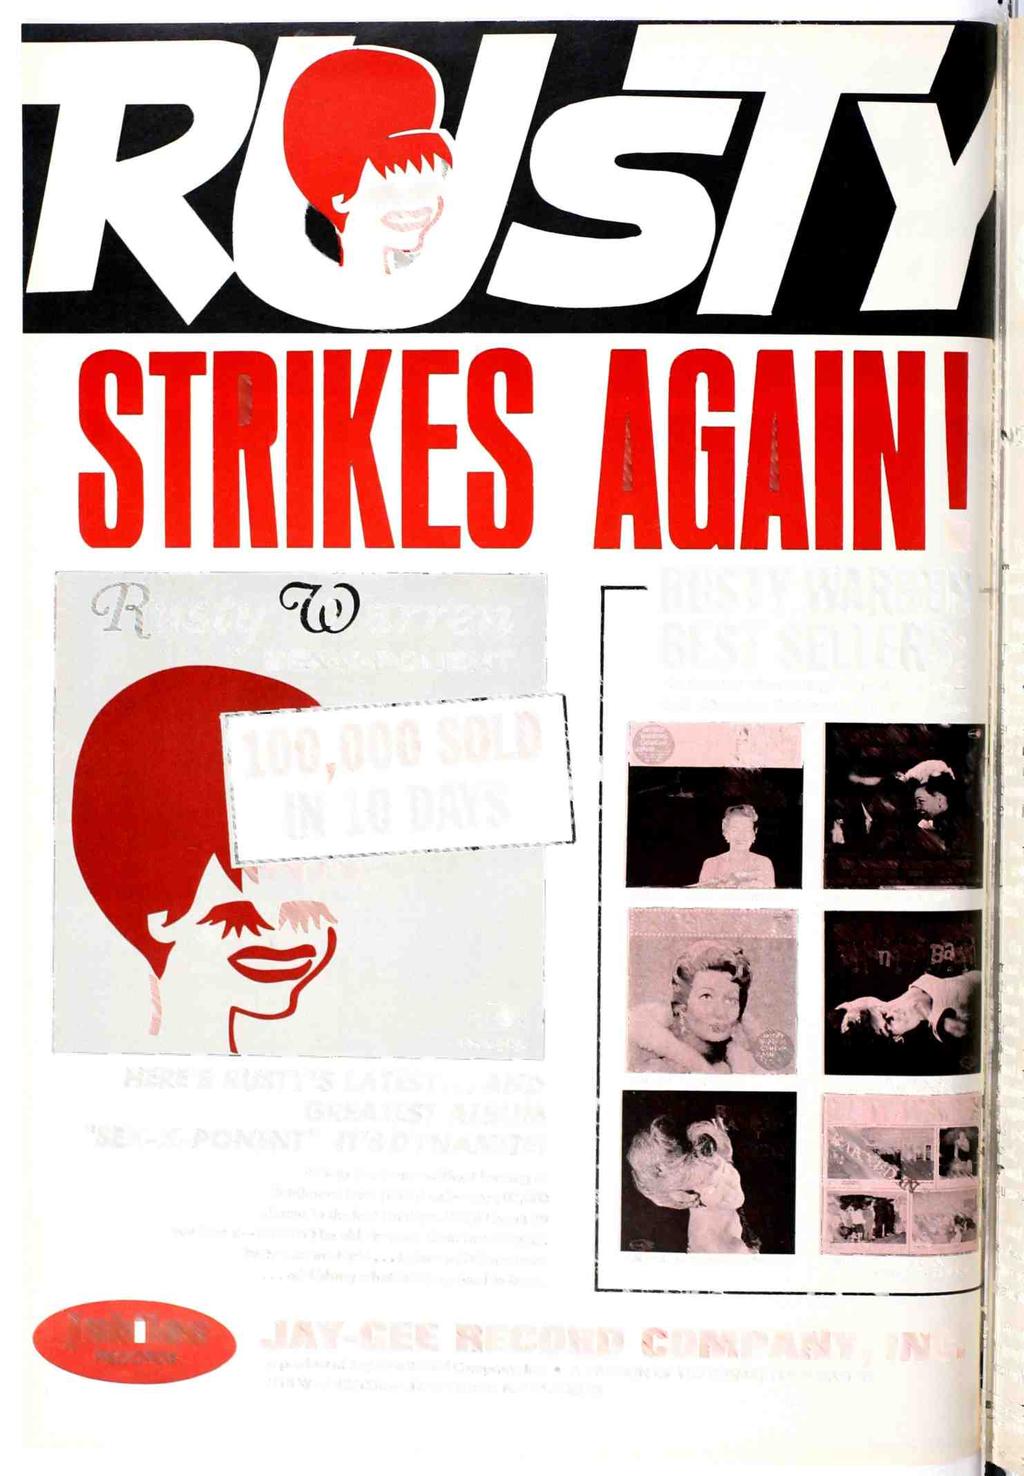 www.americanradiohistory.com SELLERS:.11 17 qiusty CZI&arren SEX-X-POfVENT AGAIN! RUSTY WARREN The Greatest "Best Selling" Comedy Catalog- Each Album Has Sold Over a Half Million Copies. ---g.